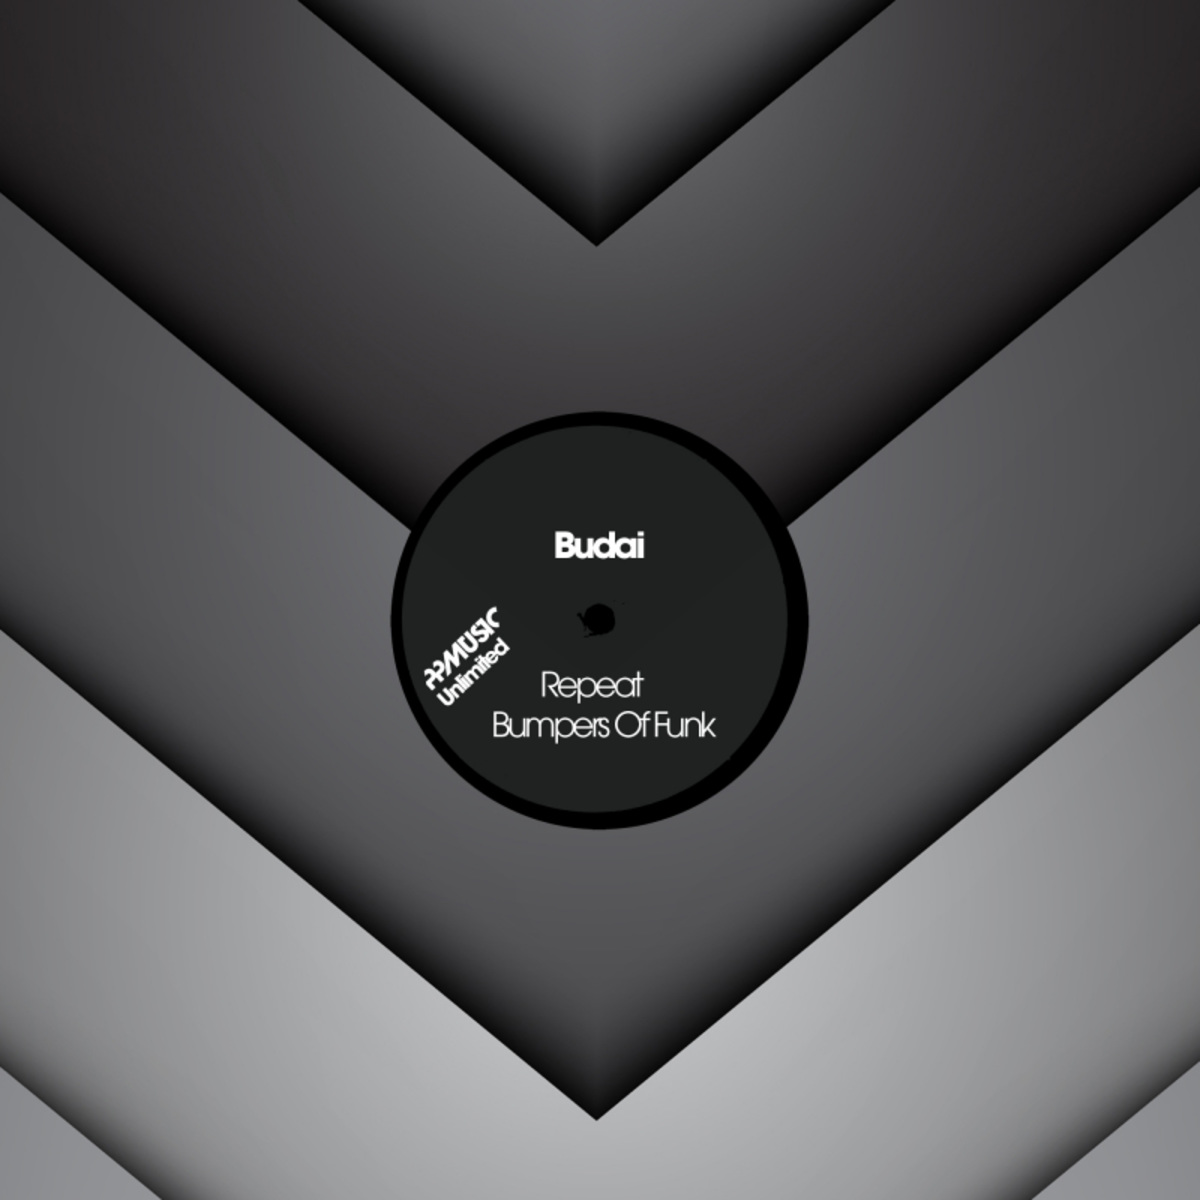 Budai - Repeat / PPMUSIC UNLIMITED